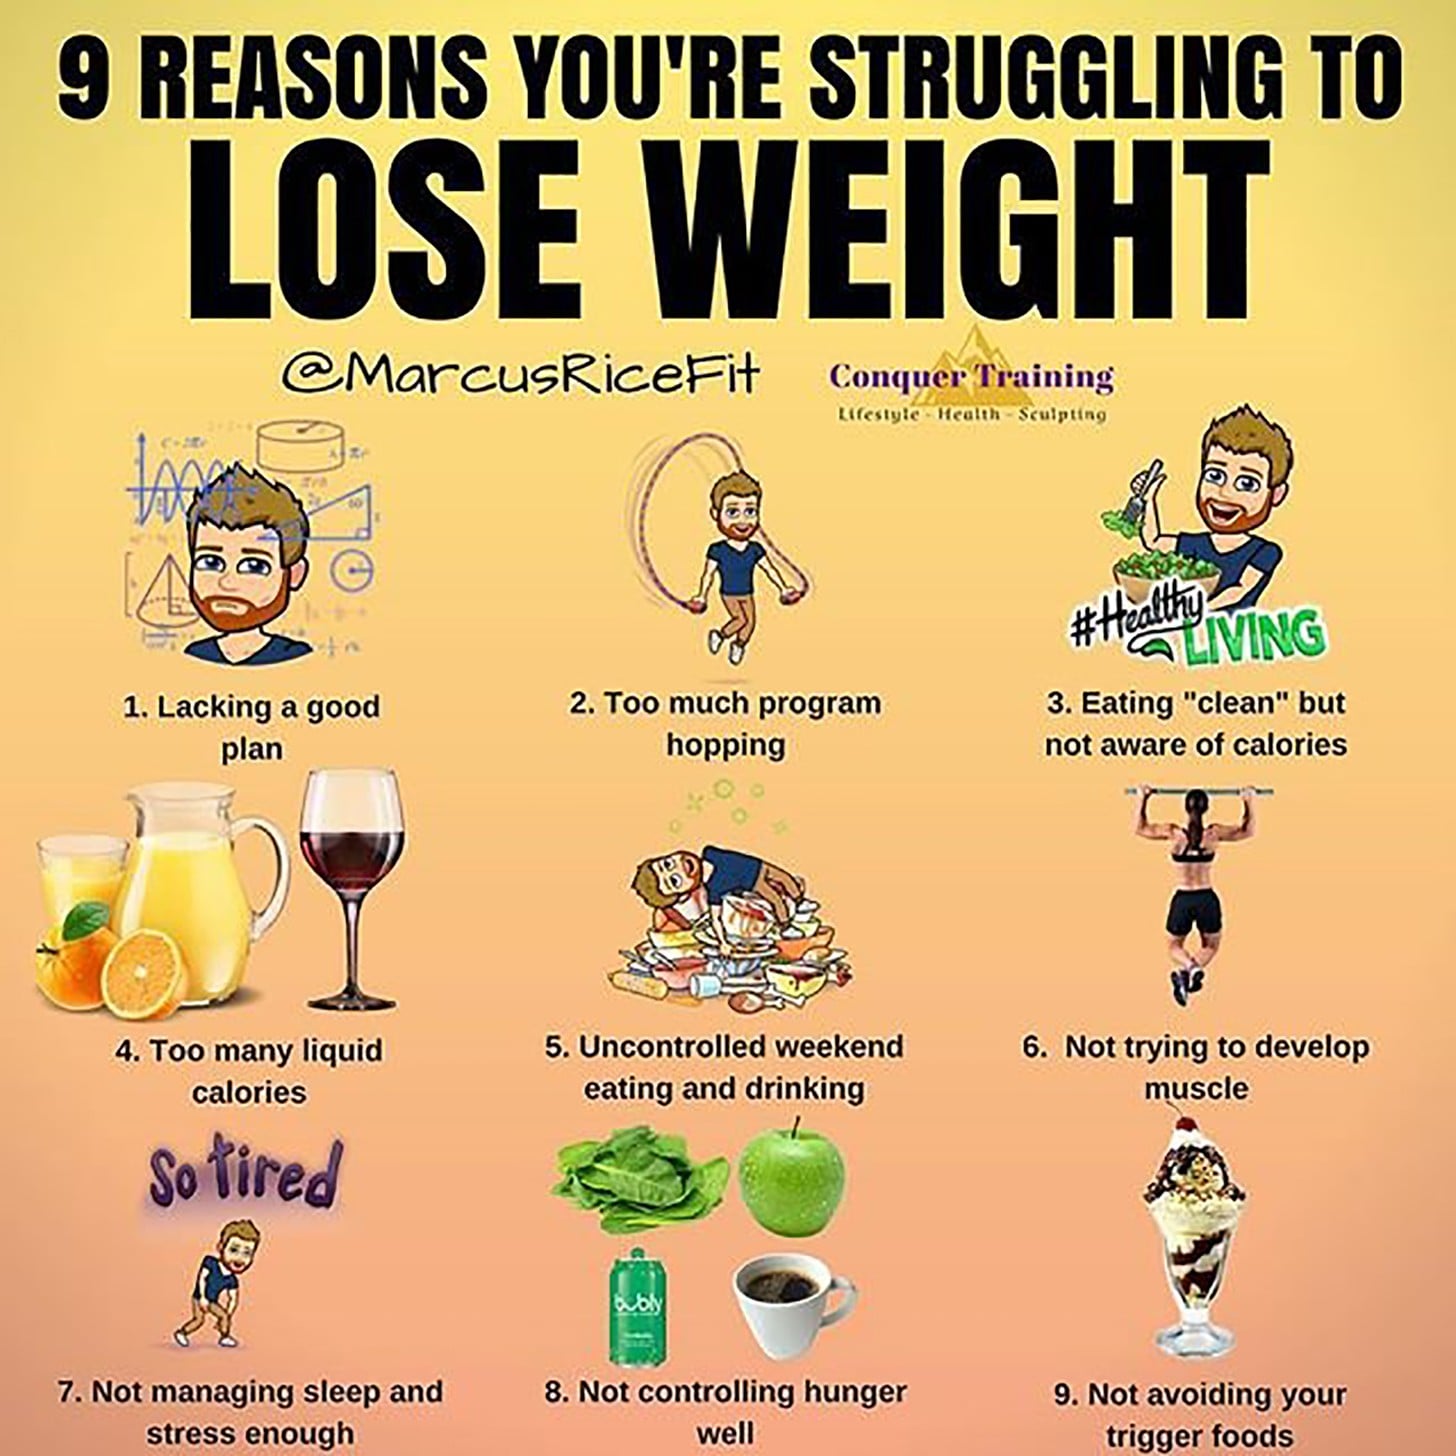 How Do I Lose Weight?